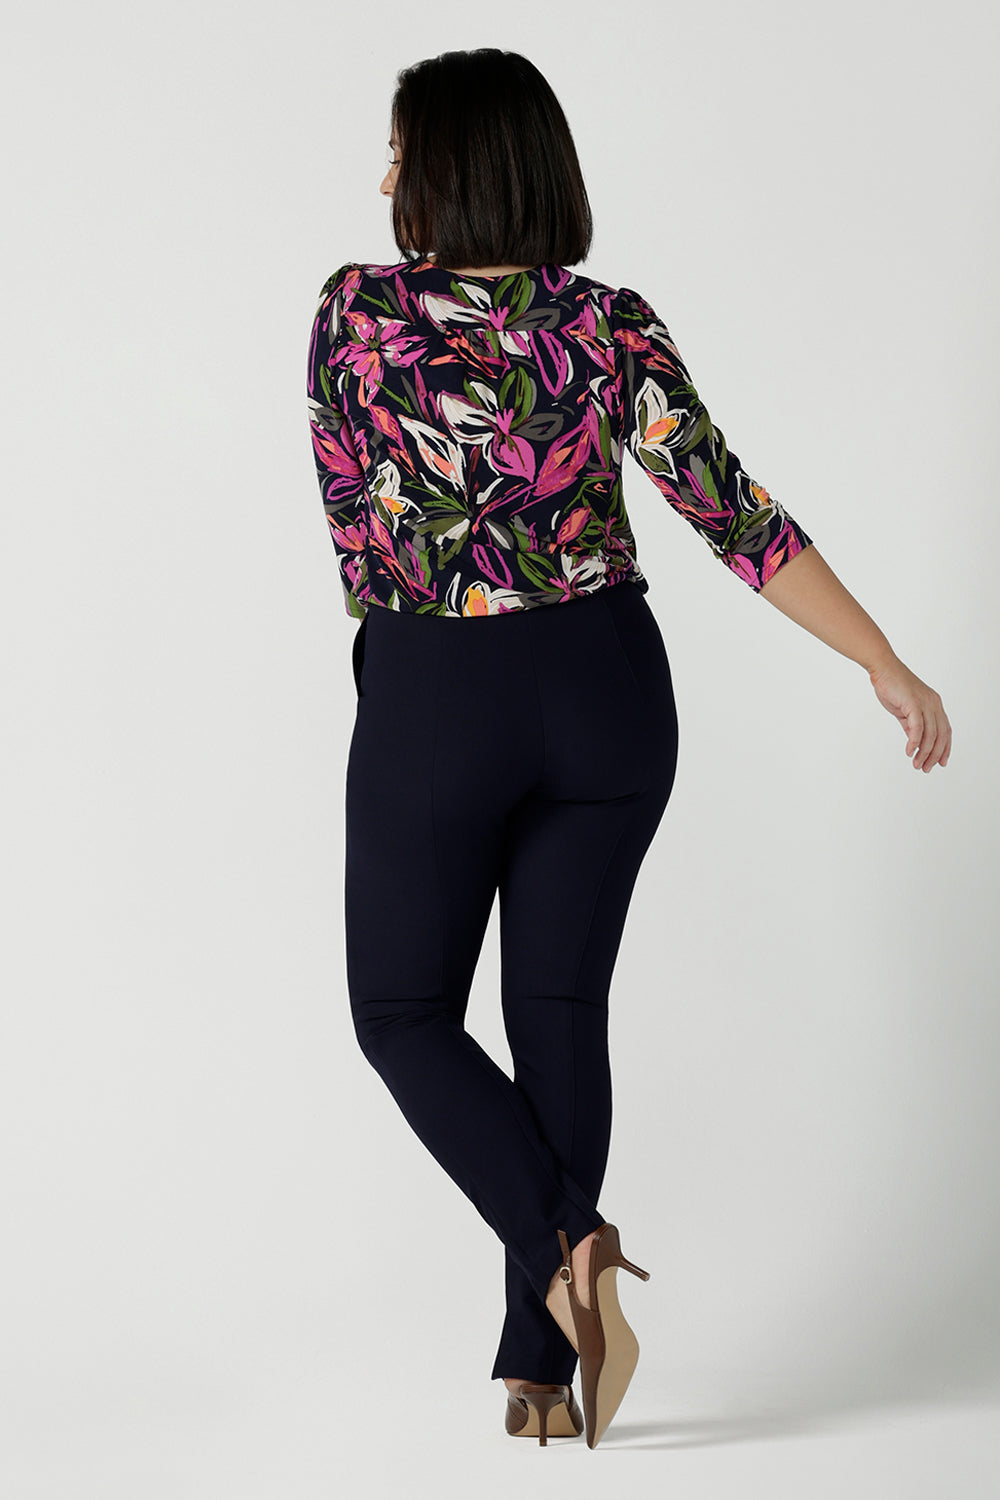 Back view of a size 10 woman wears the Vida top in Vivid Flora. A v-neckline style with 3/4 sleeves. Corporate casual work tops. Styled back with the Berit skirt in Charcoal. Made in Australia for women size 8 - 24.